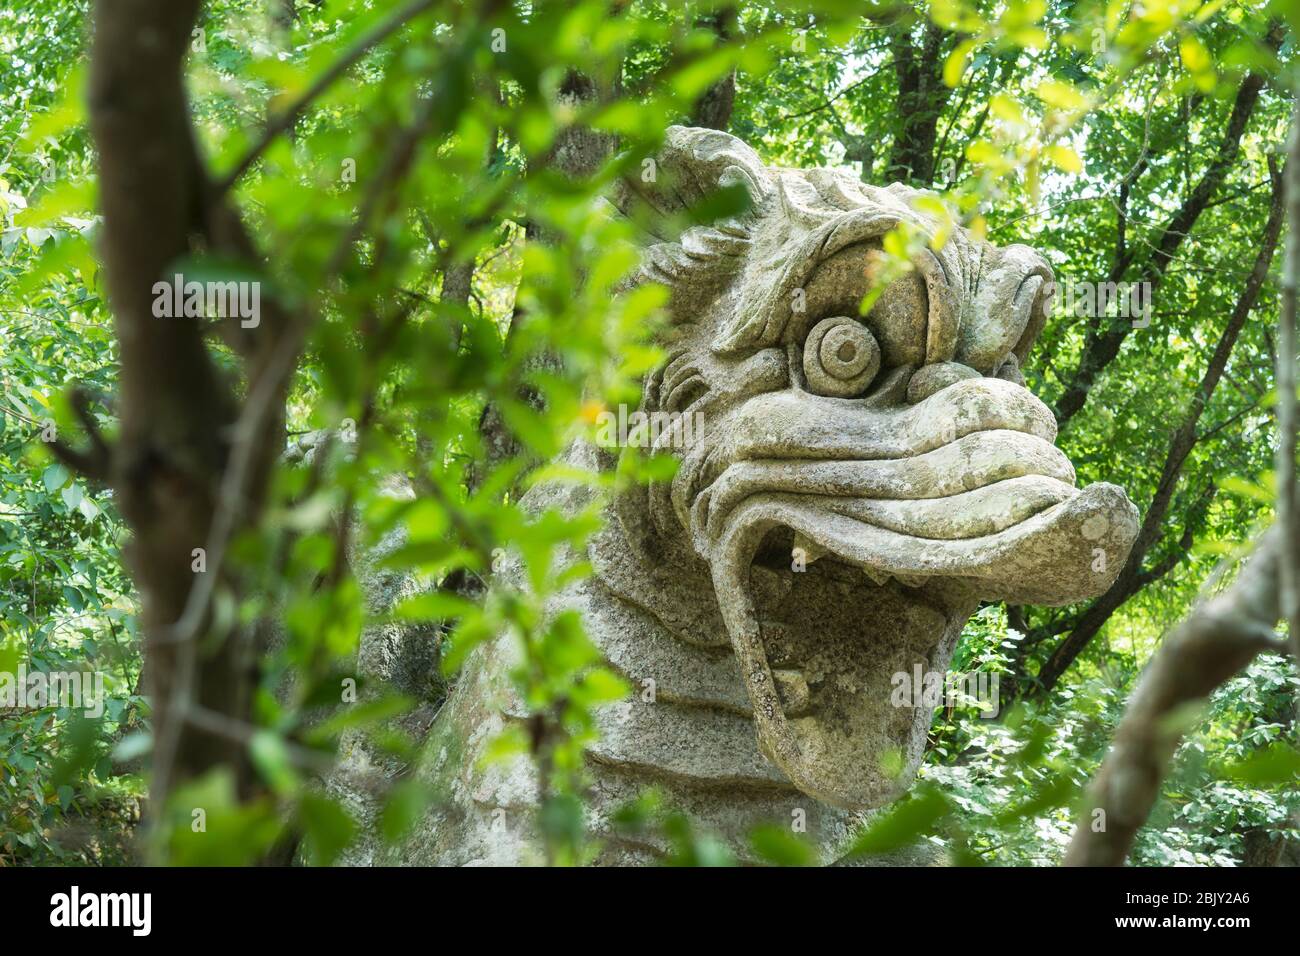 Concrete dragon head at Monster Park, Parco dei Mostri, was commissioned in 1552 by Prince Pier Francesco Orsini to express horrific grief this soldie Stock Photo